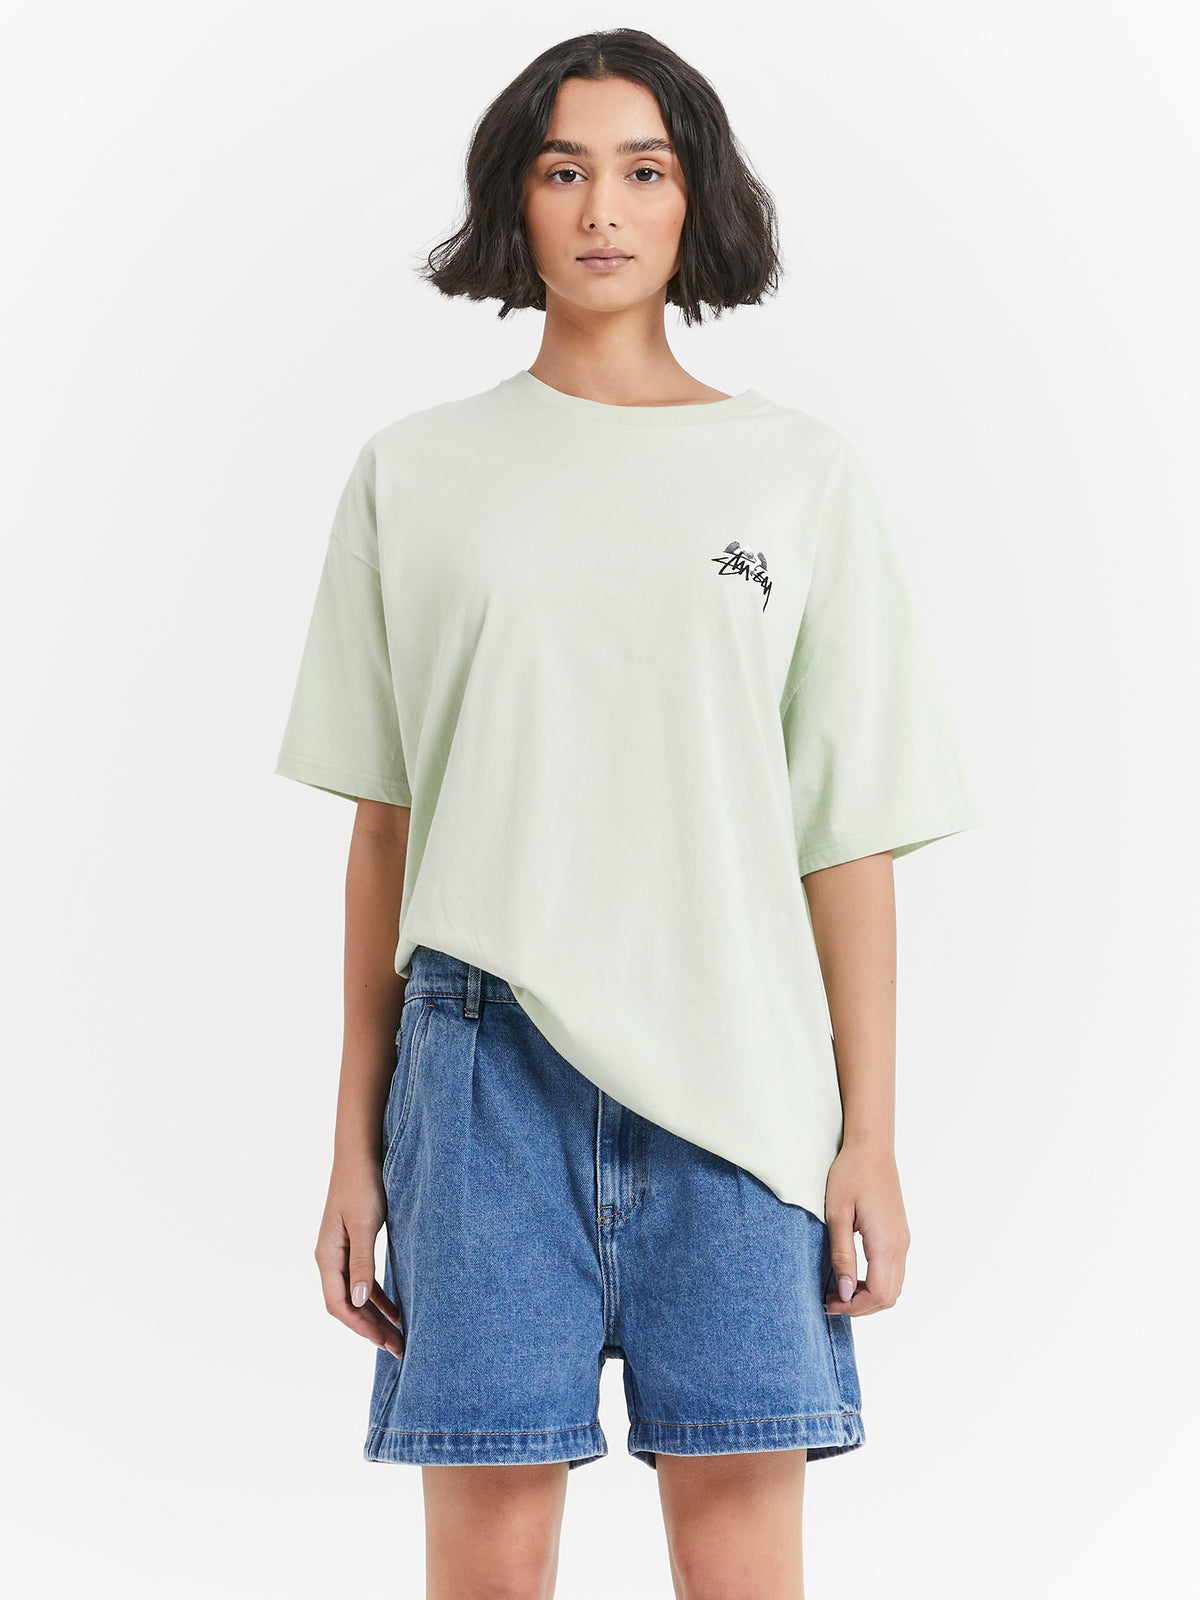 Angel Relaxed T-Shirt in Washed Green